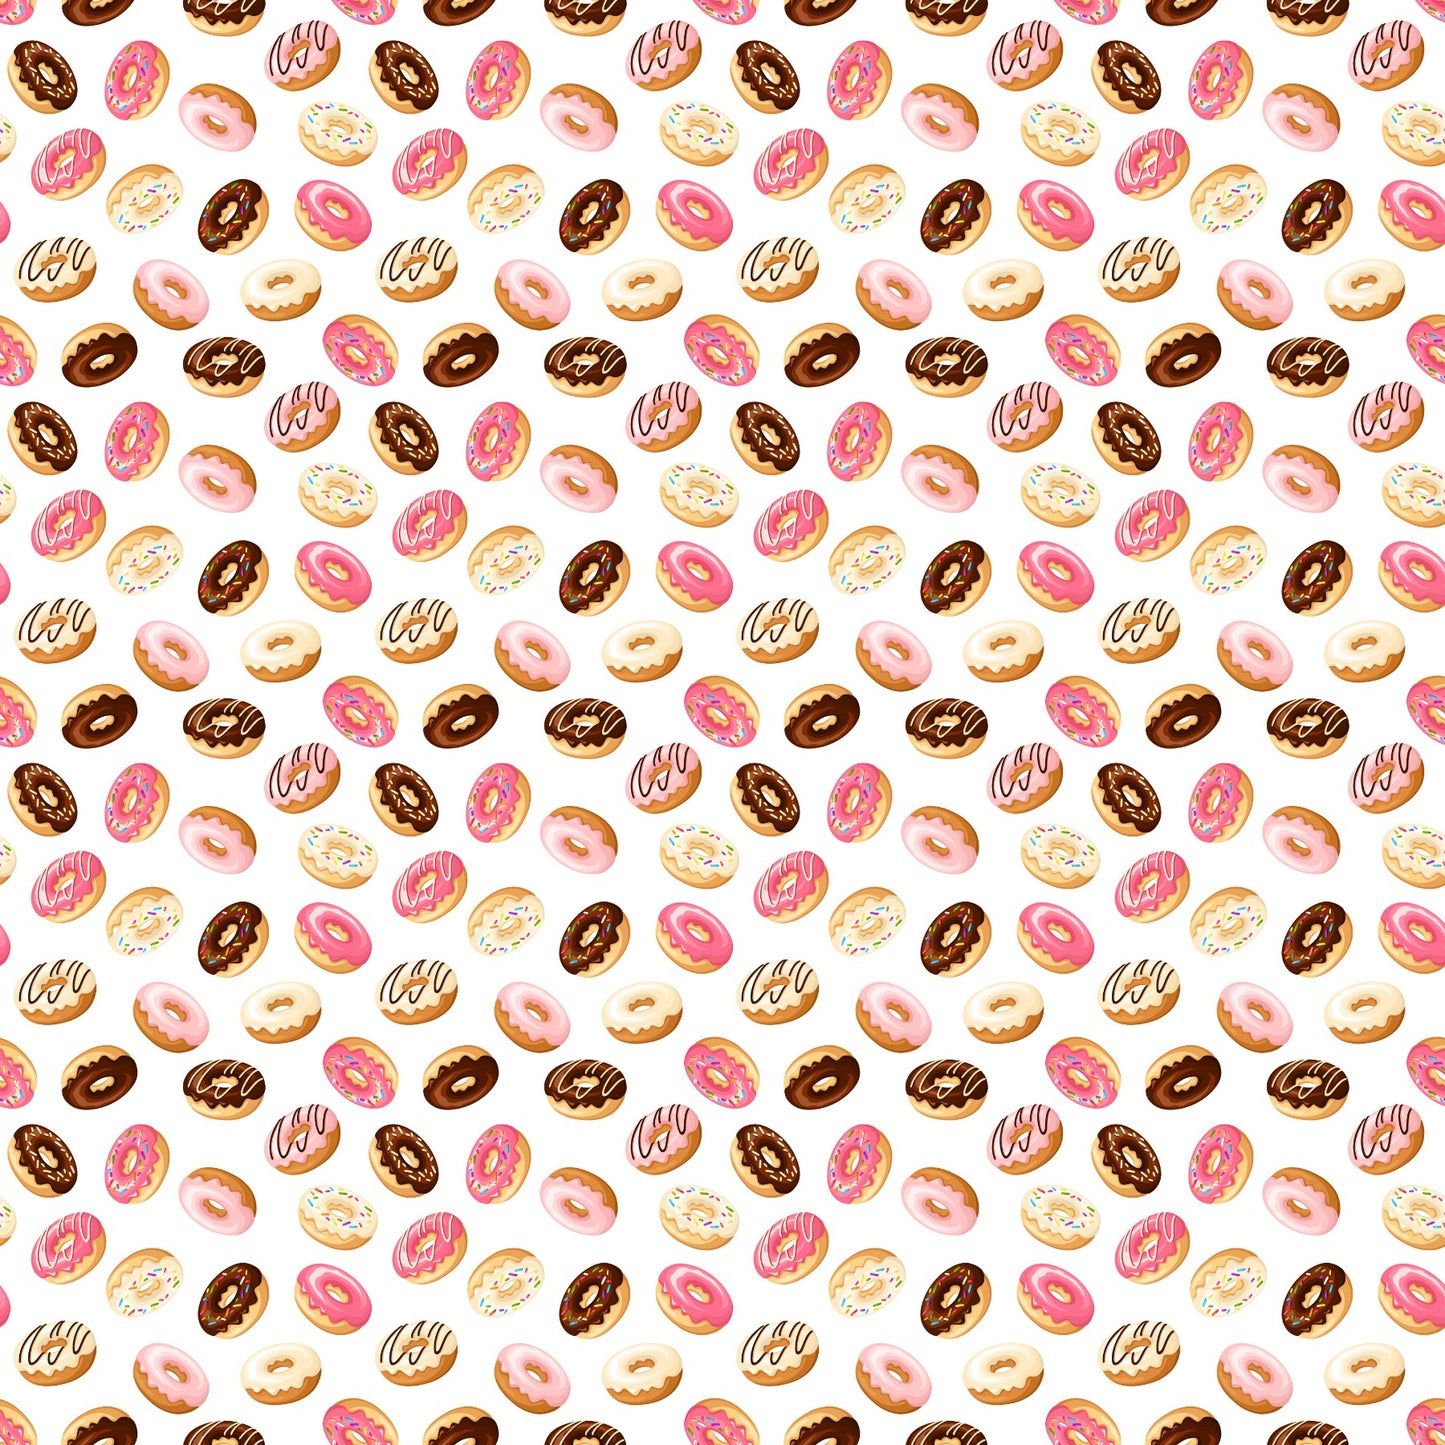 Who Doesn't Love Donuts - Adhesive Vinyl